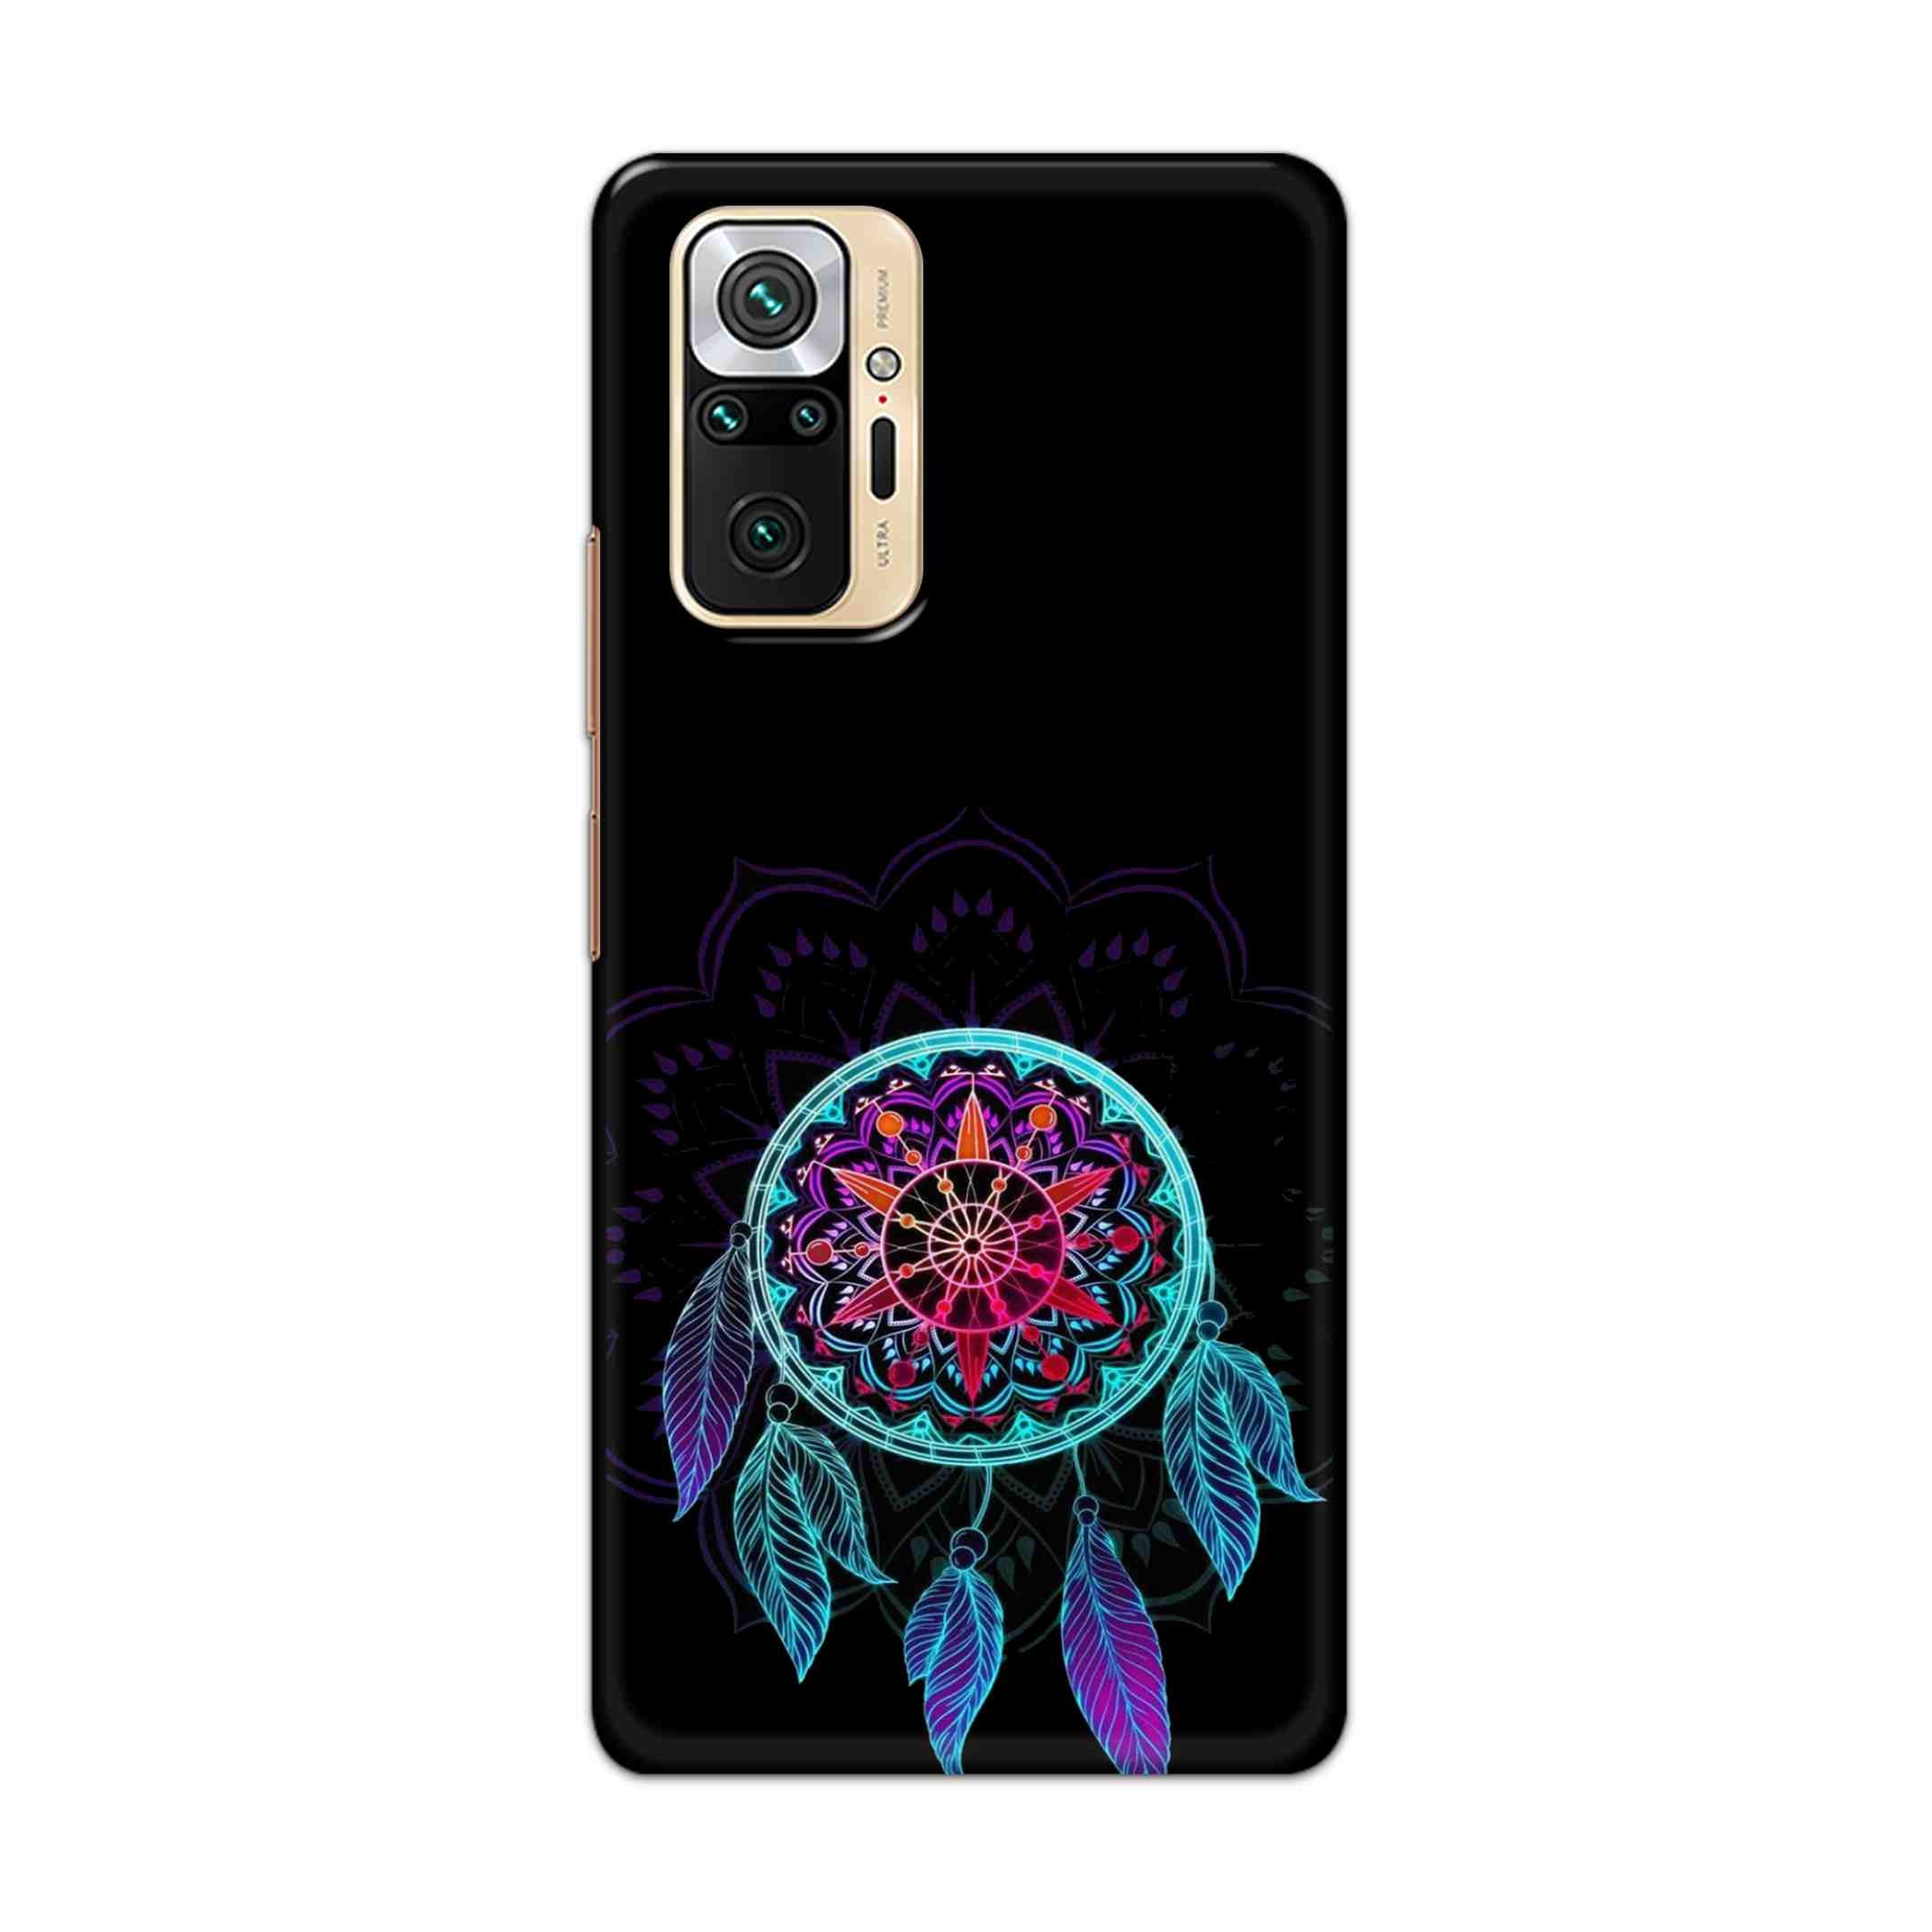 Buy Dream Catcher Hard Back Mobile Phone Case Cover For Redmi Note 10 Pro Online